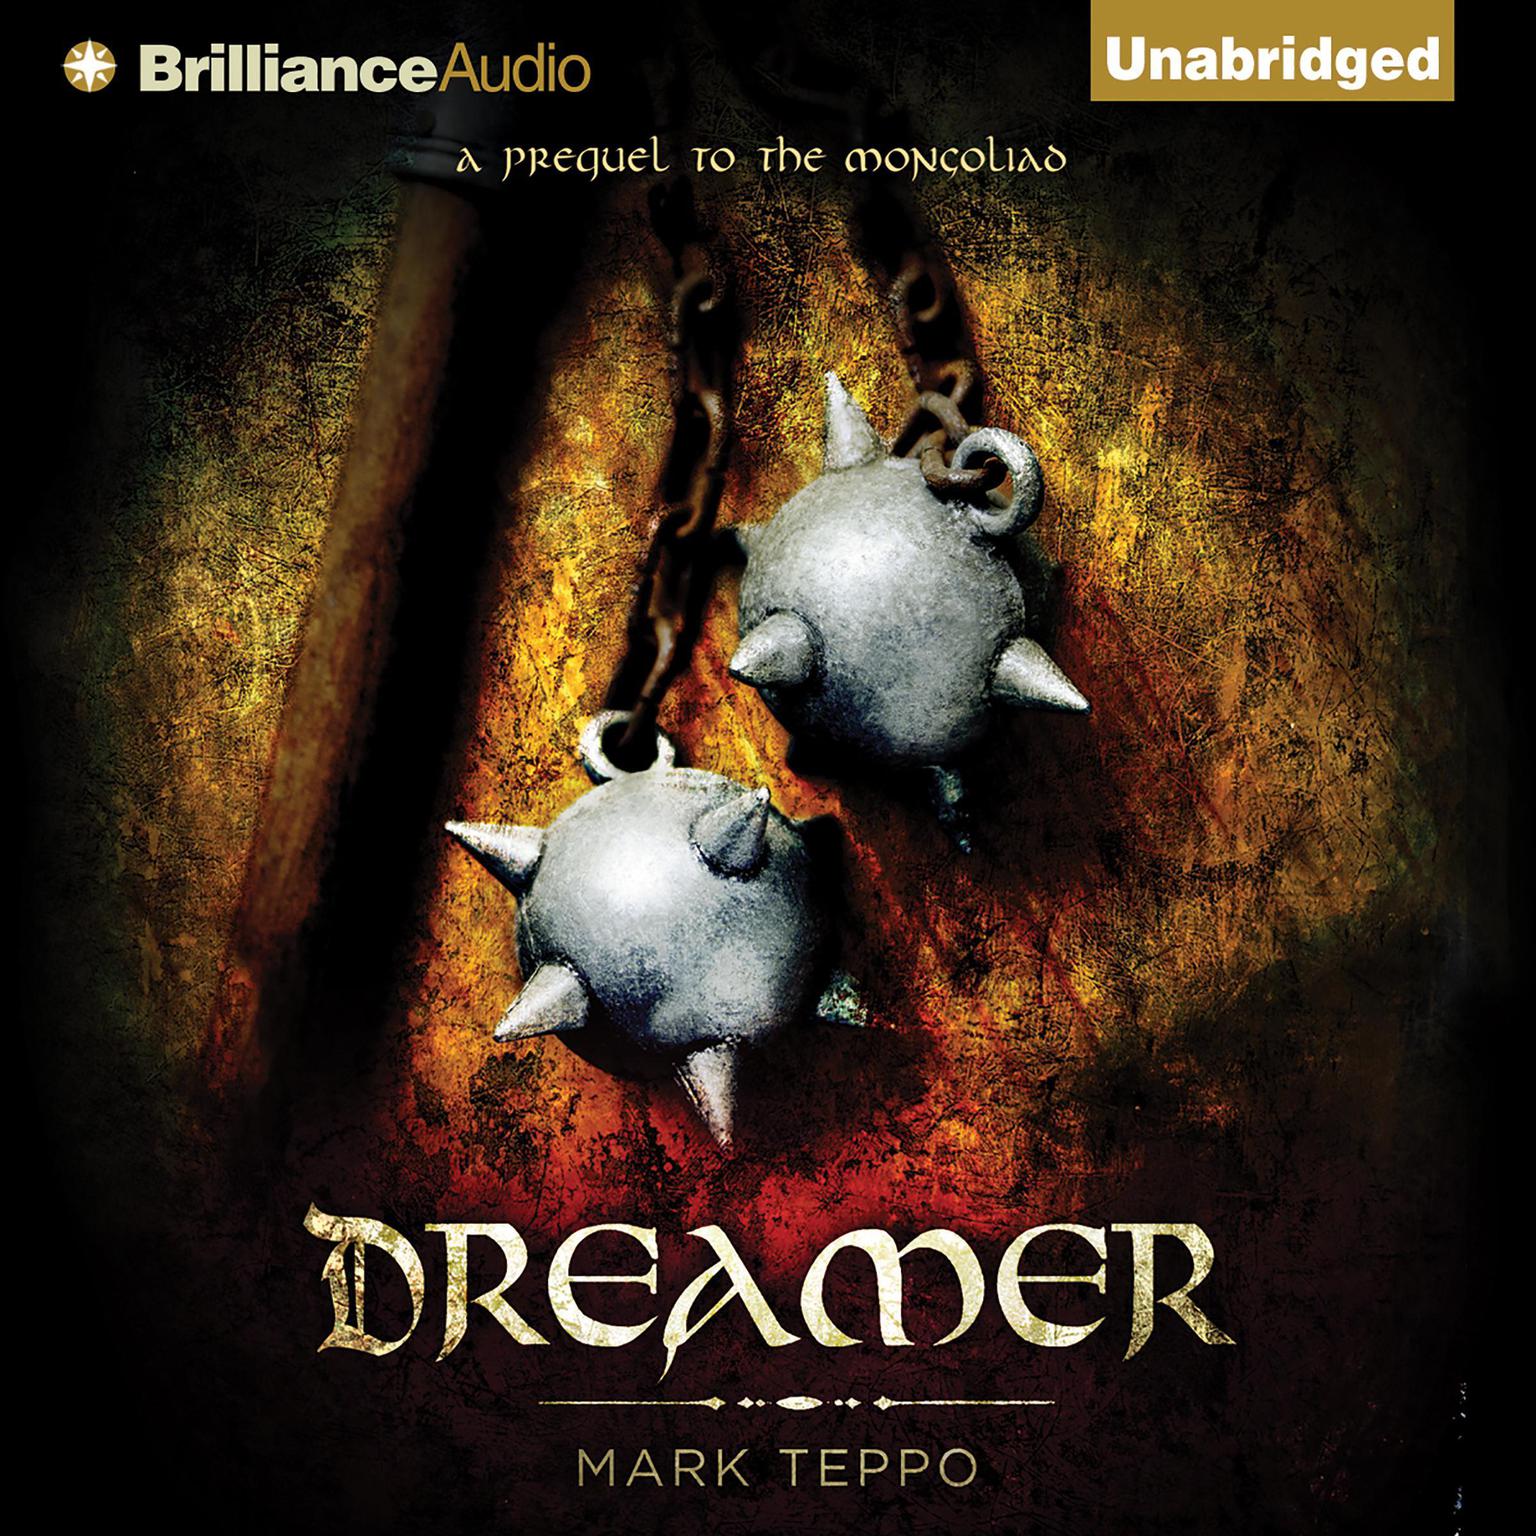 Dreamer: A Prequel to the Mongoliad Audiobook, by Mark Teppo